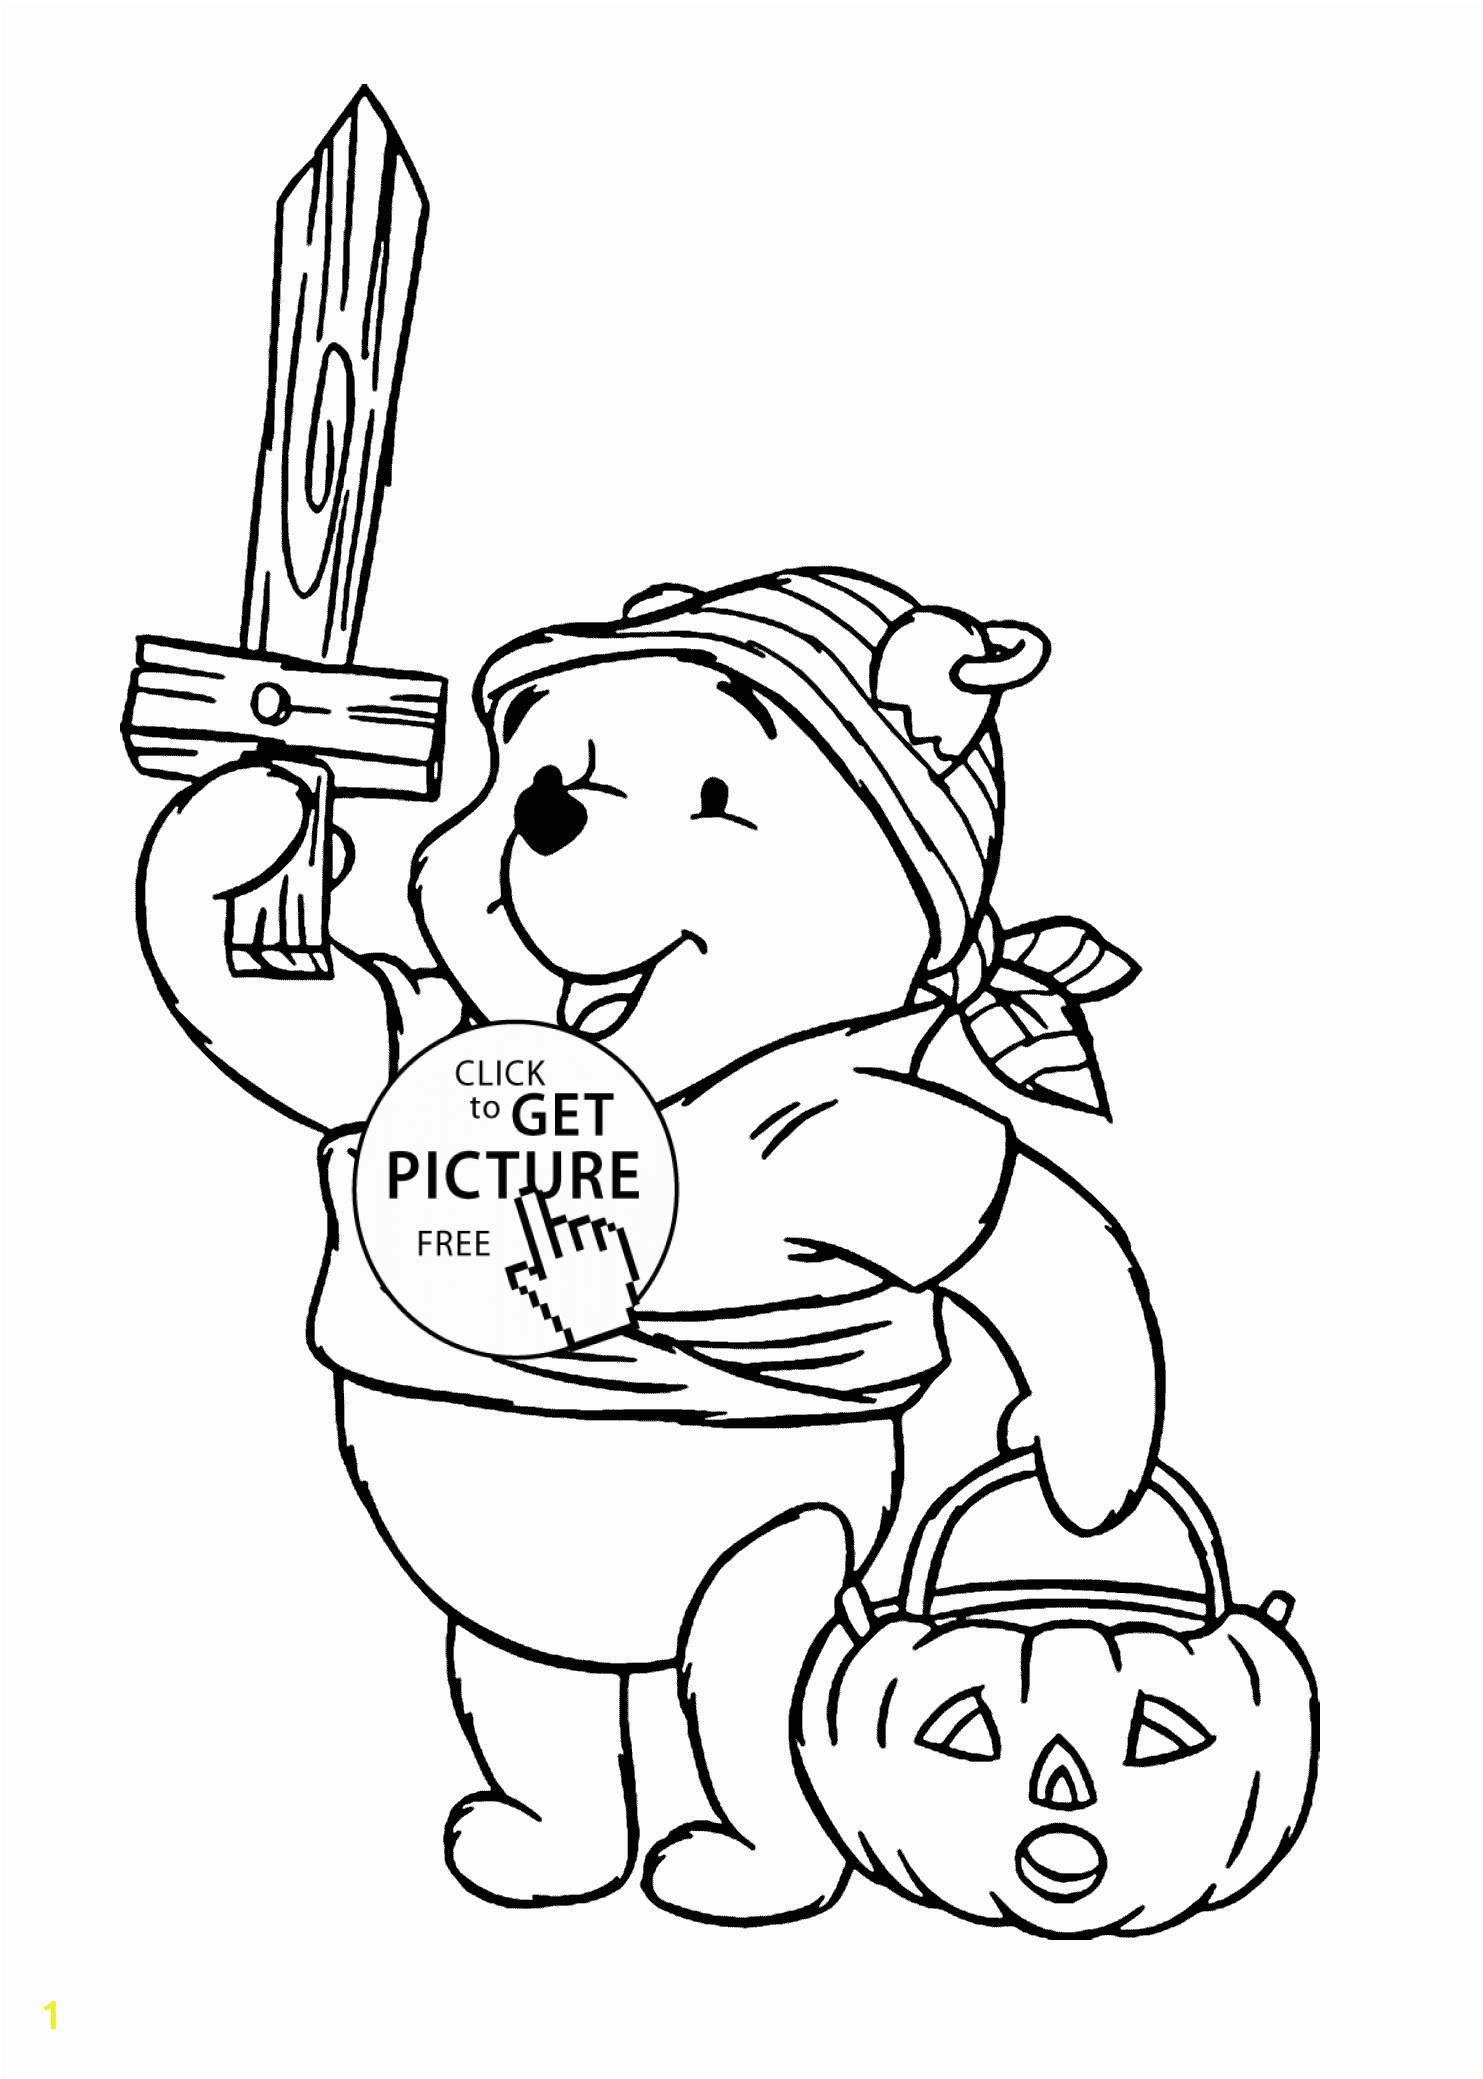 Free Winnie the Pooh Halloween Coloring Pages Happy Halloween and Winnie the Pooh Coloring Page for Kids